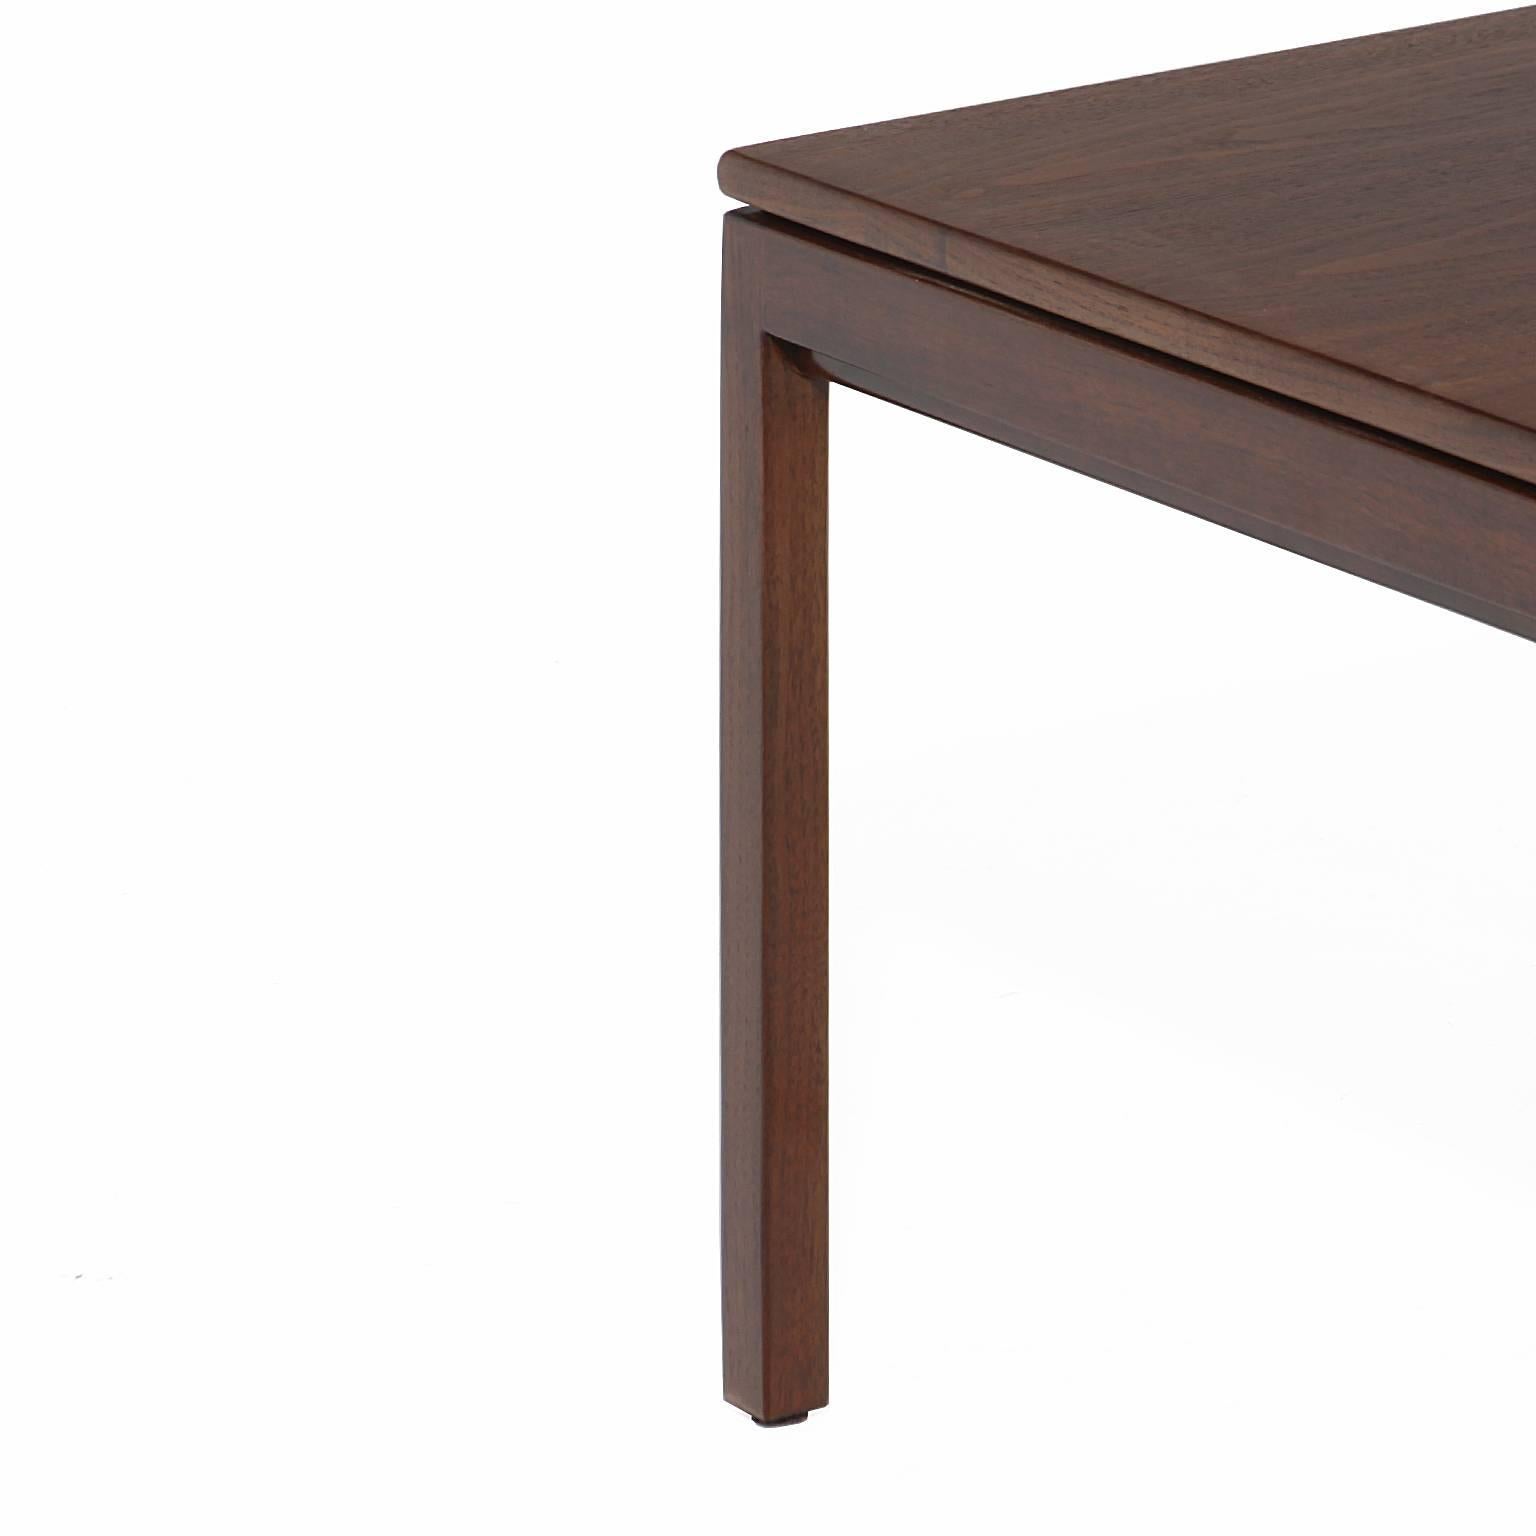 Mid-20th Century Vintage Walnut End Table by Jens Risom